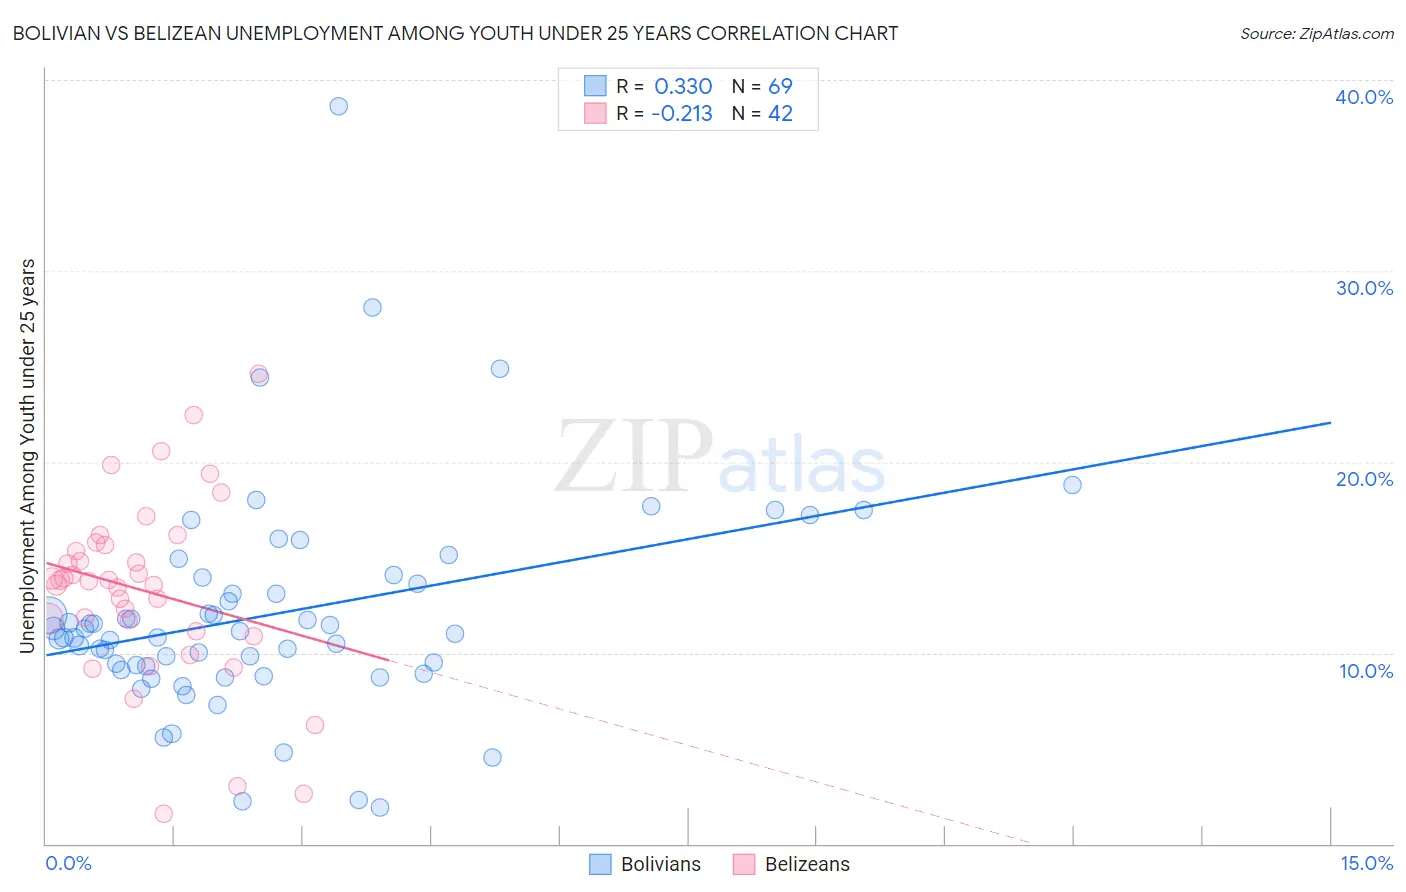 Bolivian vs Belizean Unemployment Among Youth under 25 years